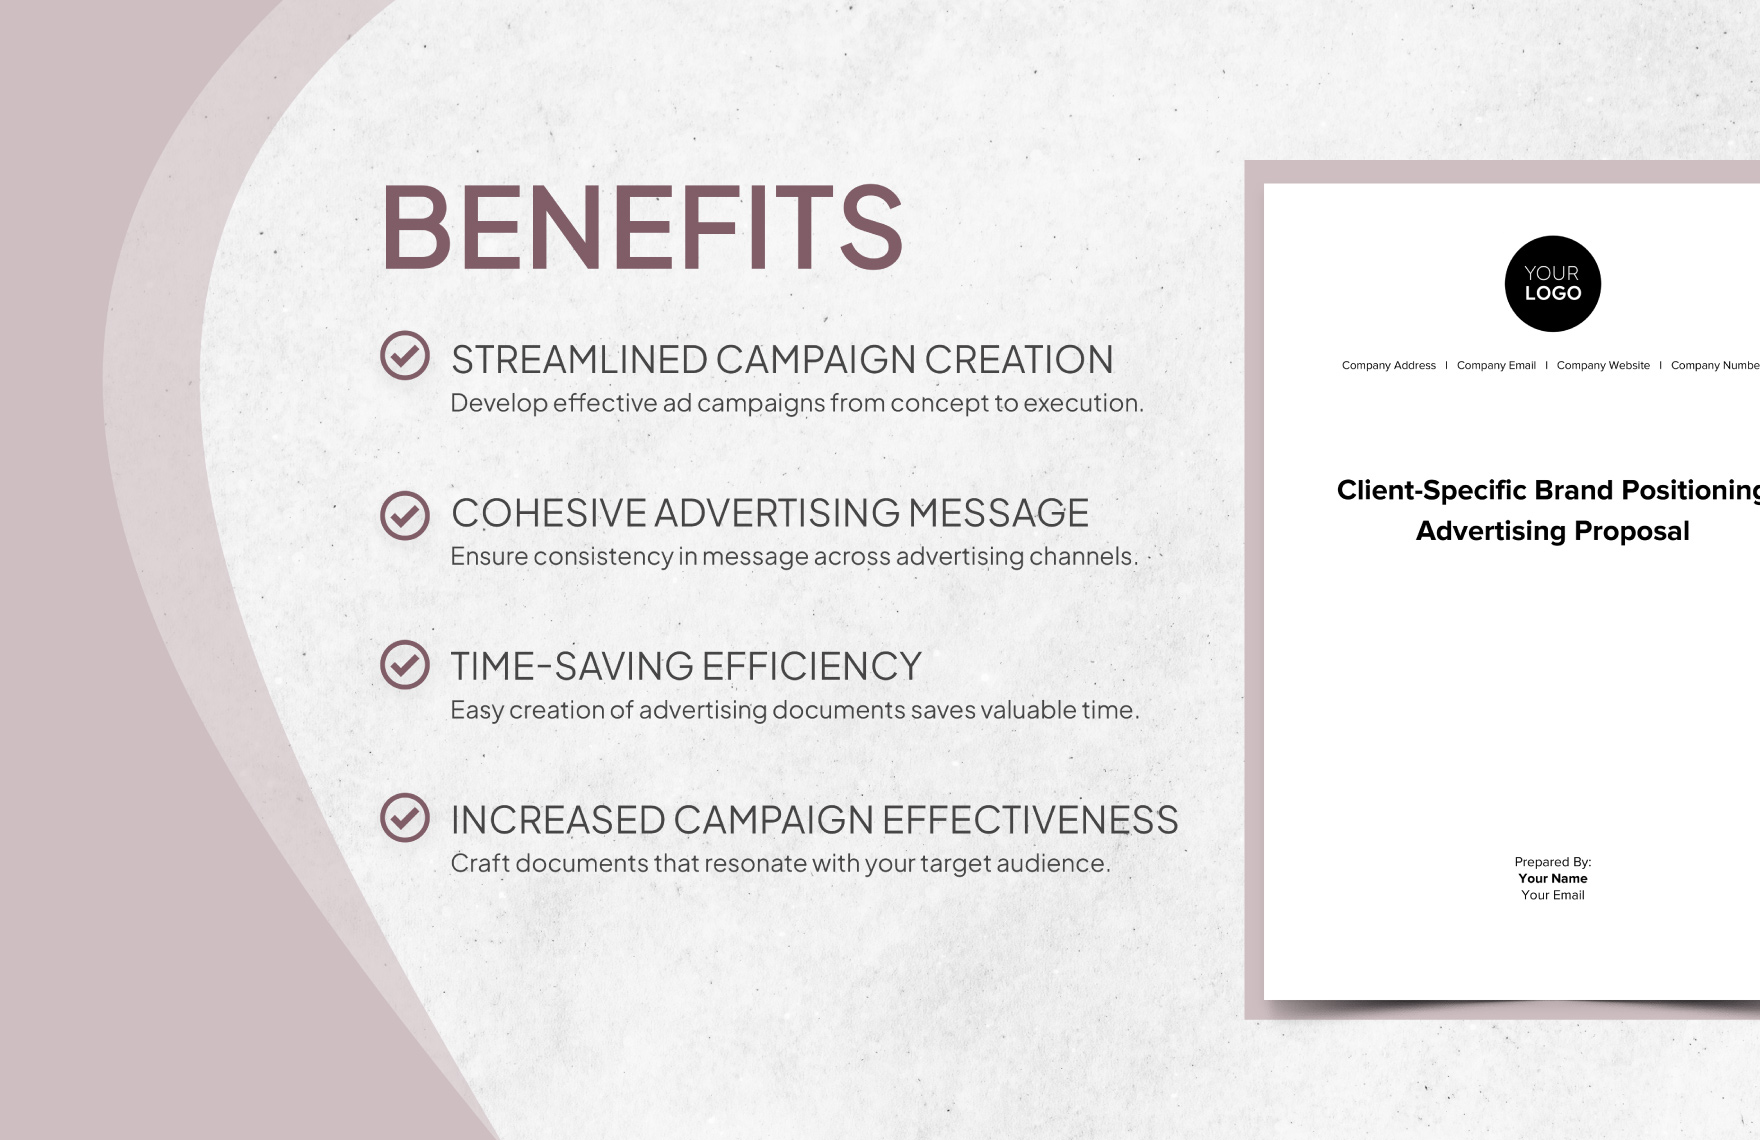 ClientSpecific Brand Positioning Advertising Proposal Template